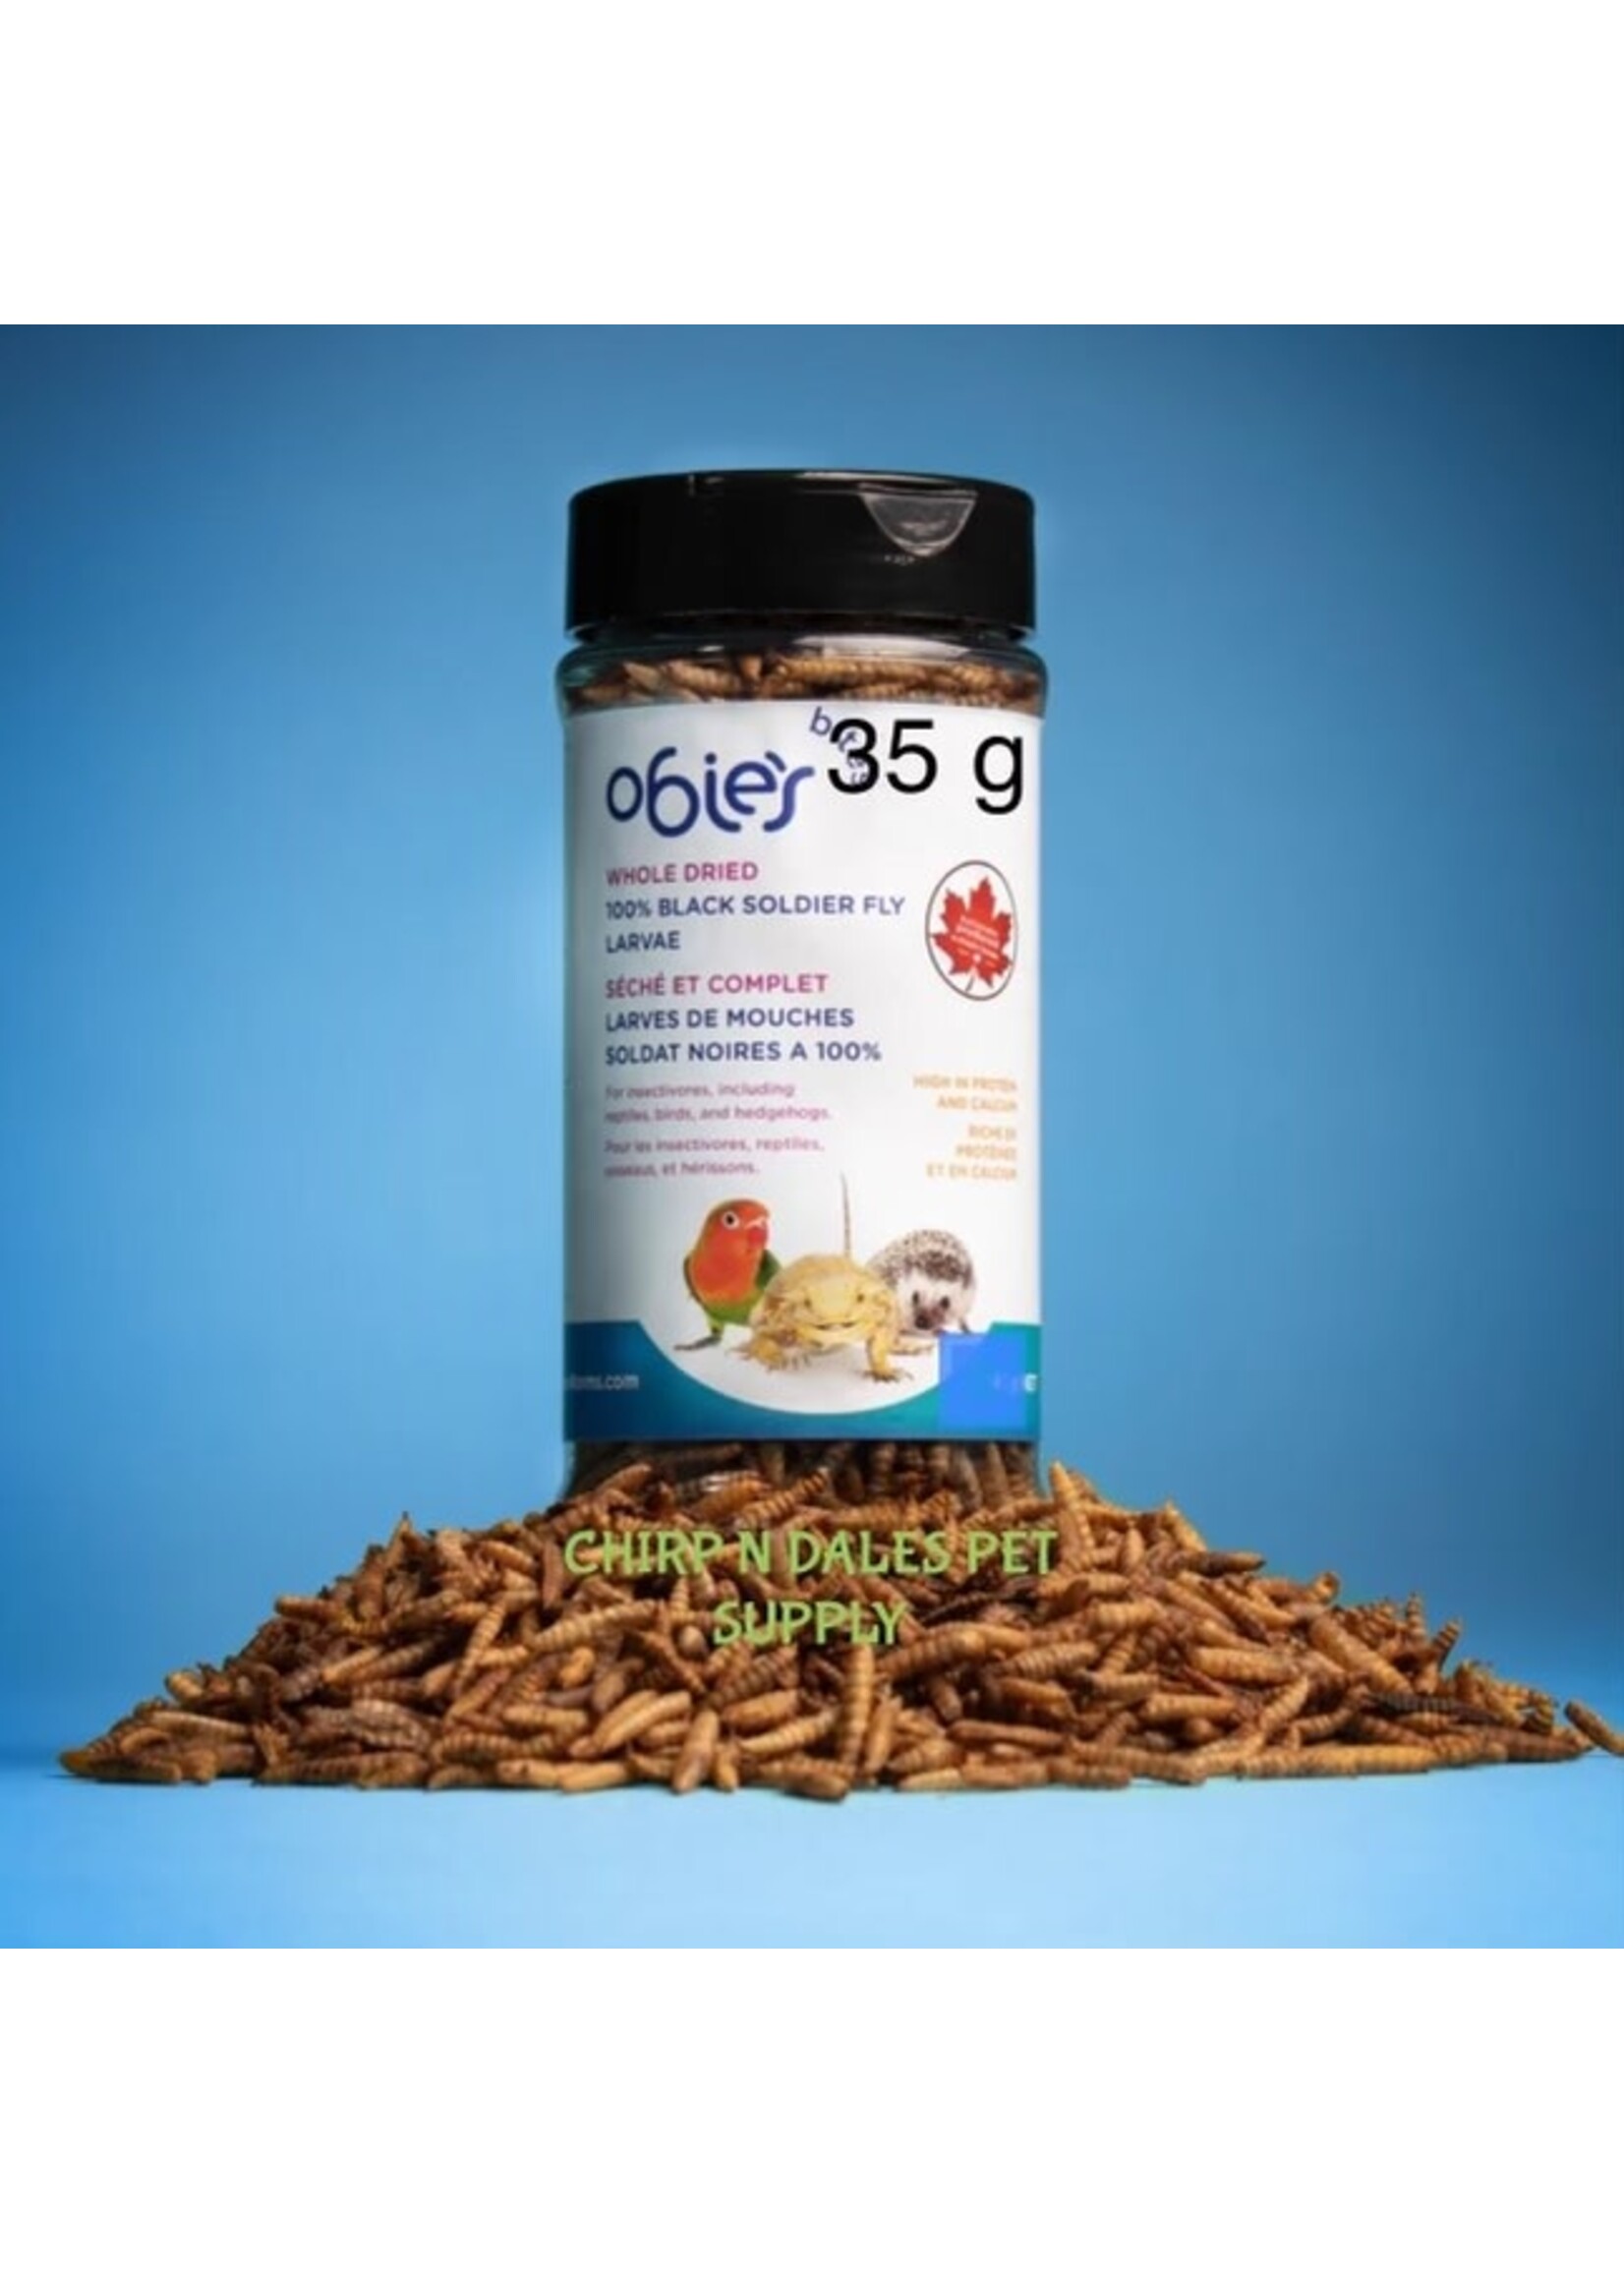 Obie's Bites Whole Dried Black Soldier Fly Larvae 35 g